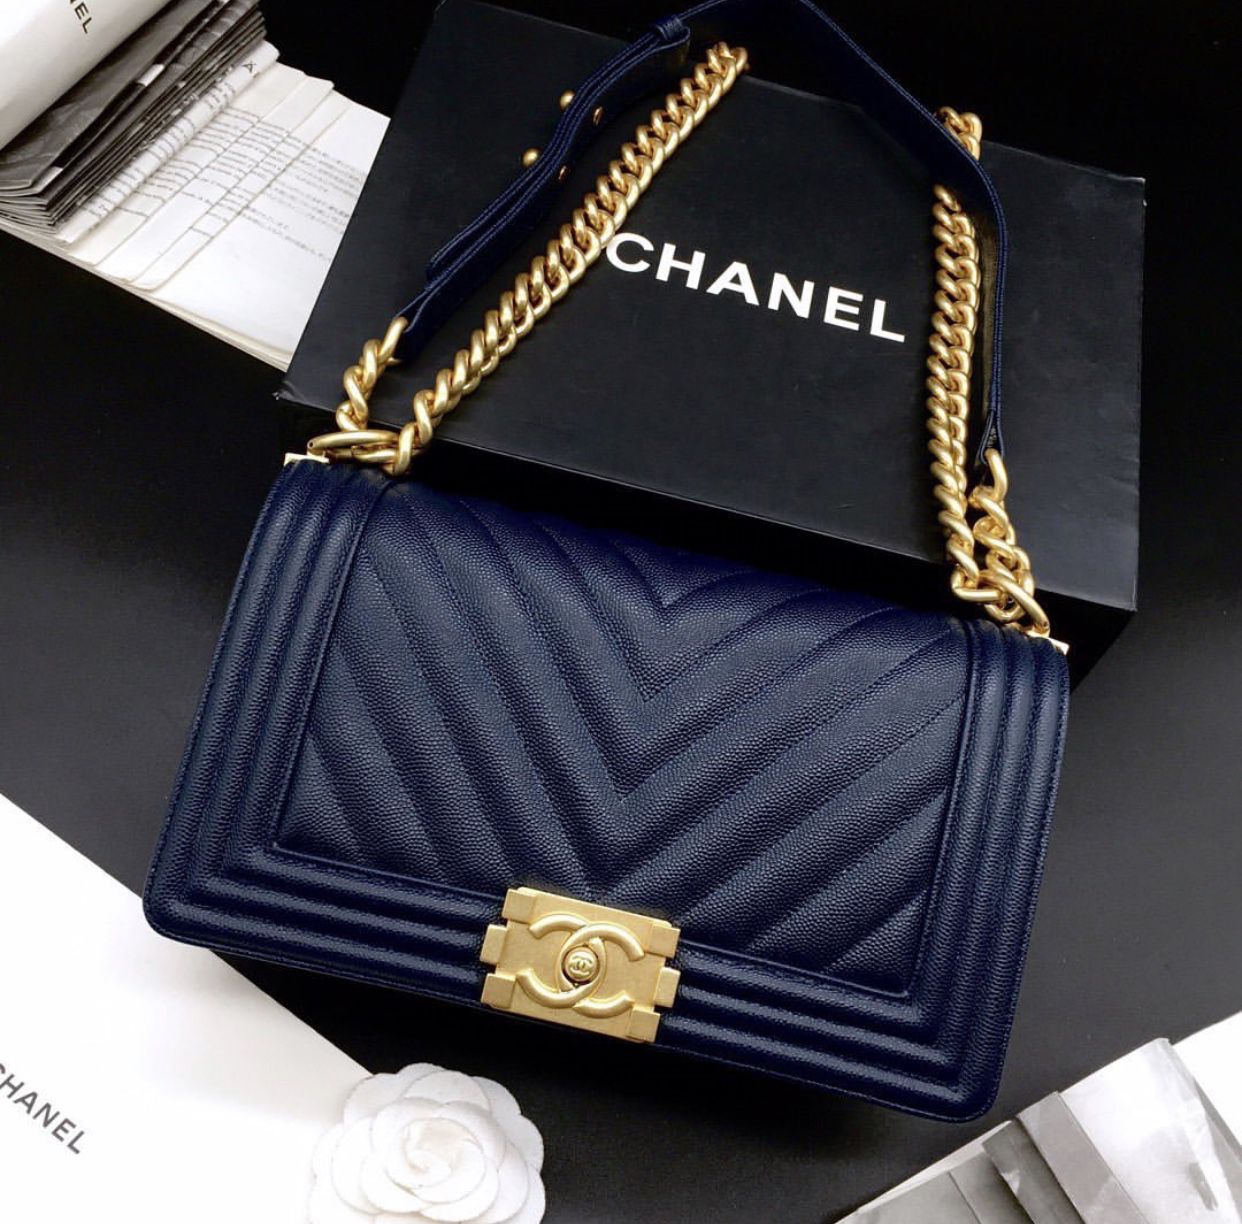 Blue Chanel Bag for Sale in Los Angeles, CA - OfferUp